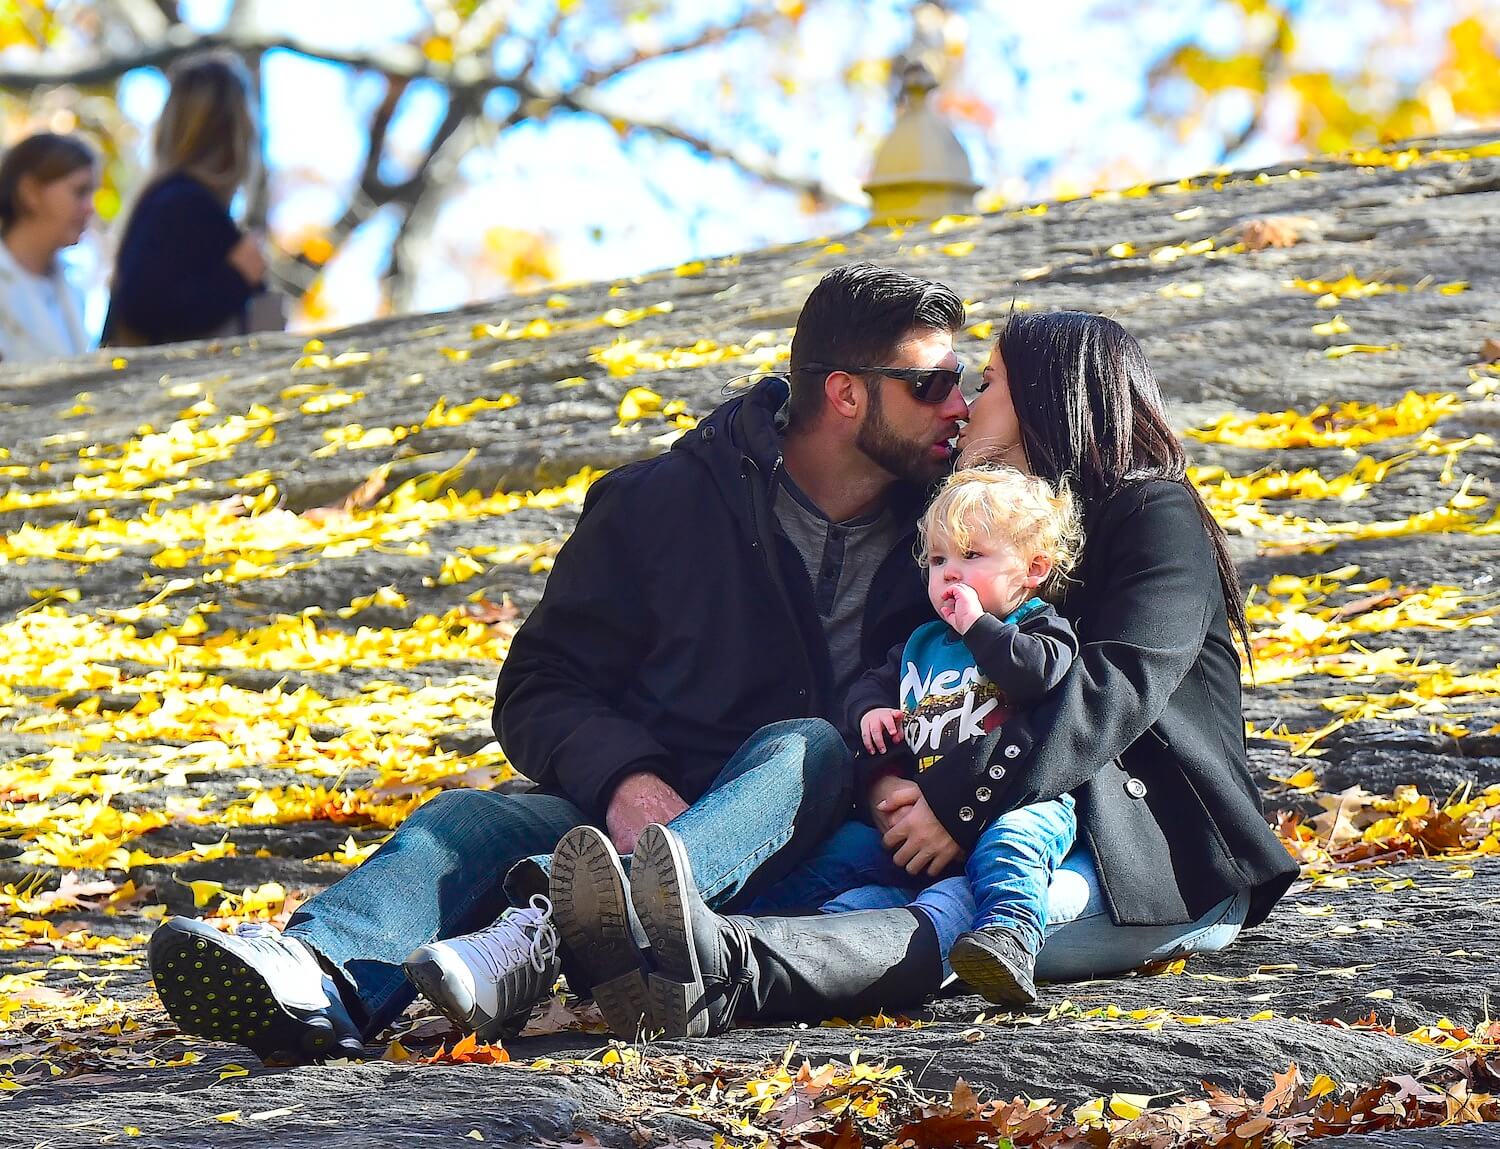 'Teen Mom' star Jenelle Evans sitting in a park and kissing David Eason with her son, Kaiser, on her lap